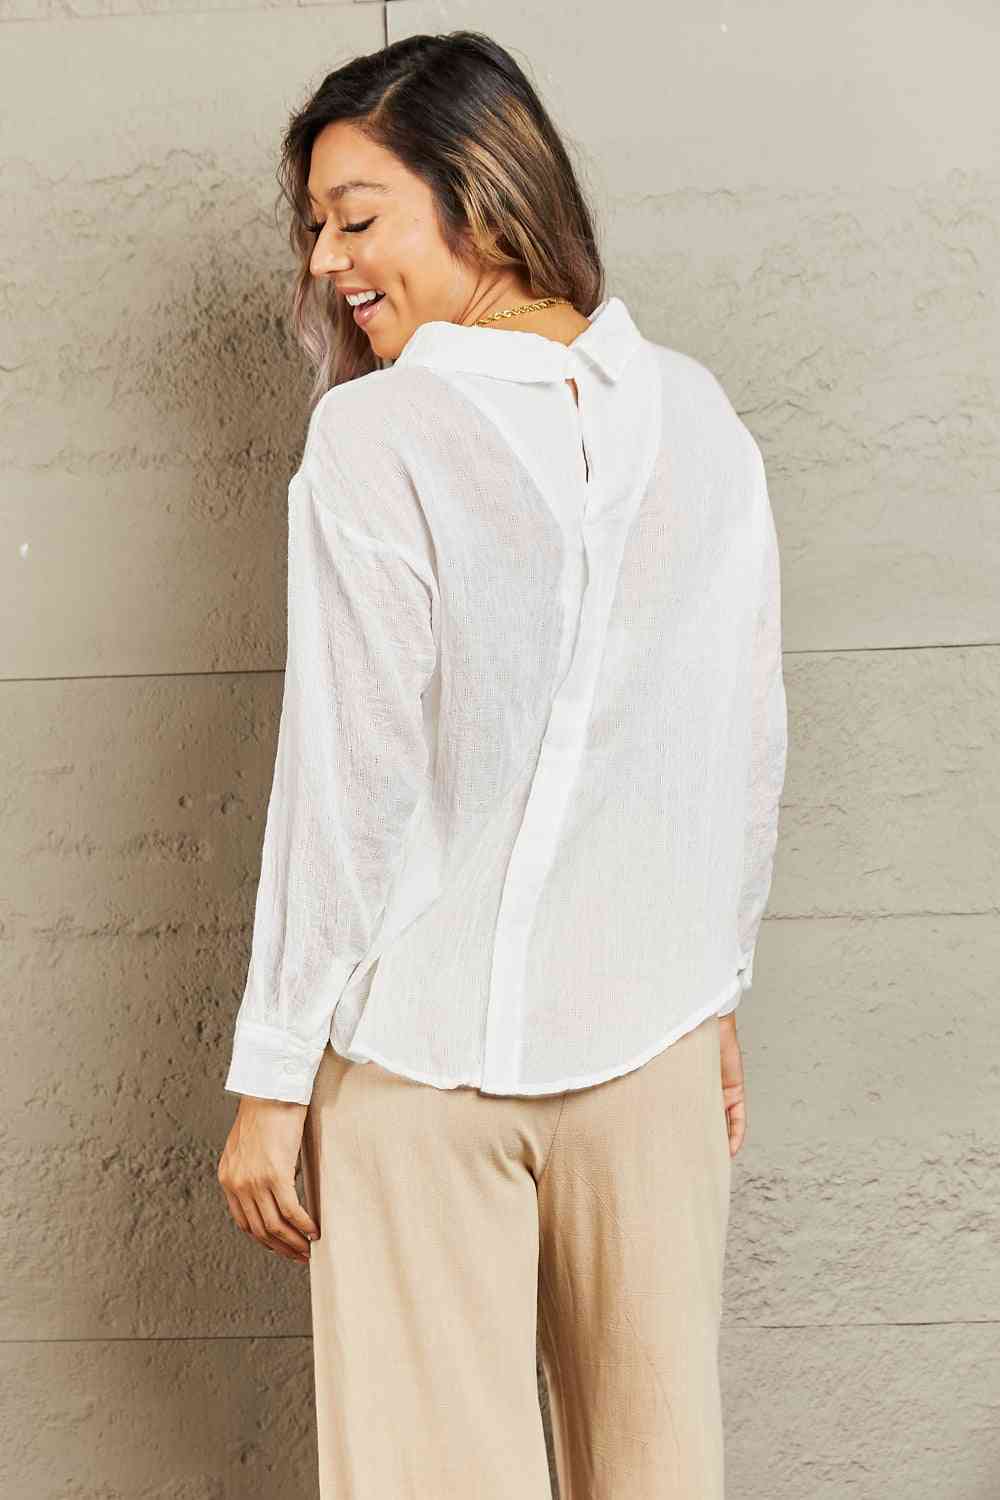 Take Me Out Lightweight Button Down Top - Camis & Tops - Shirts & Tops - 2 - 2024